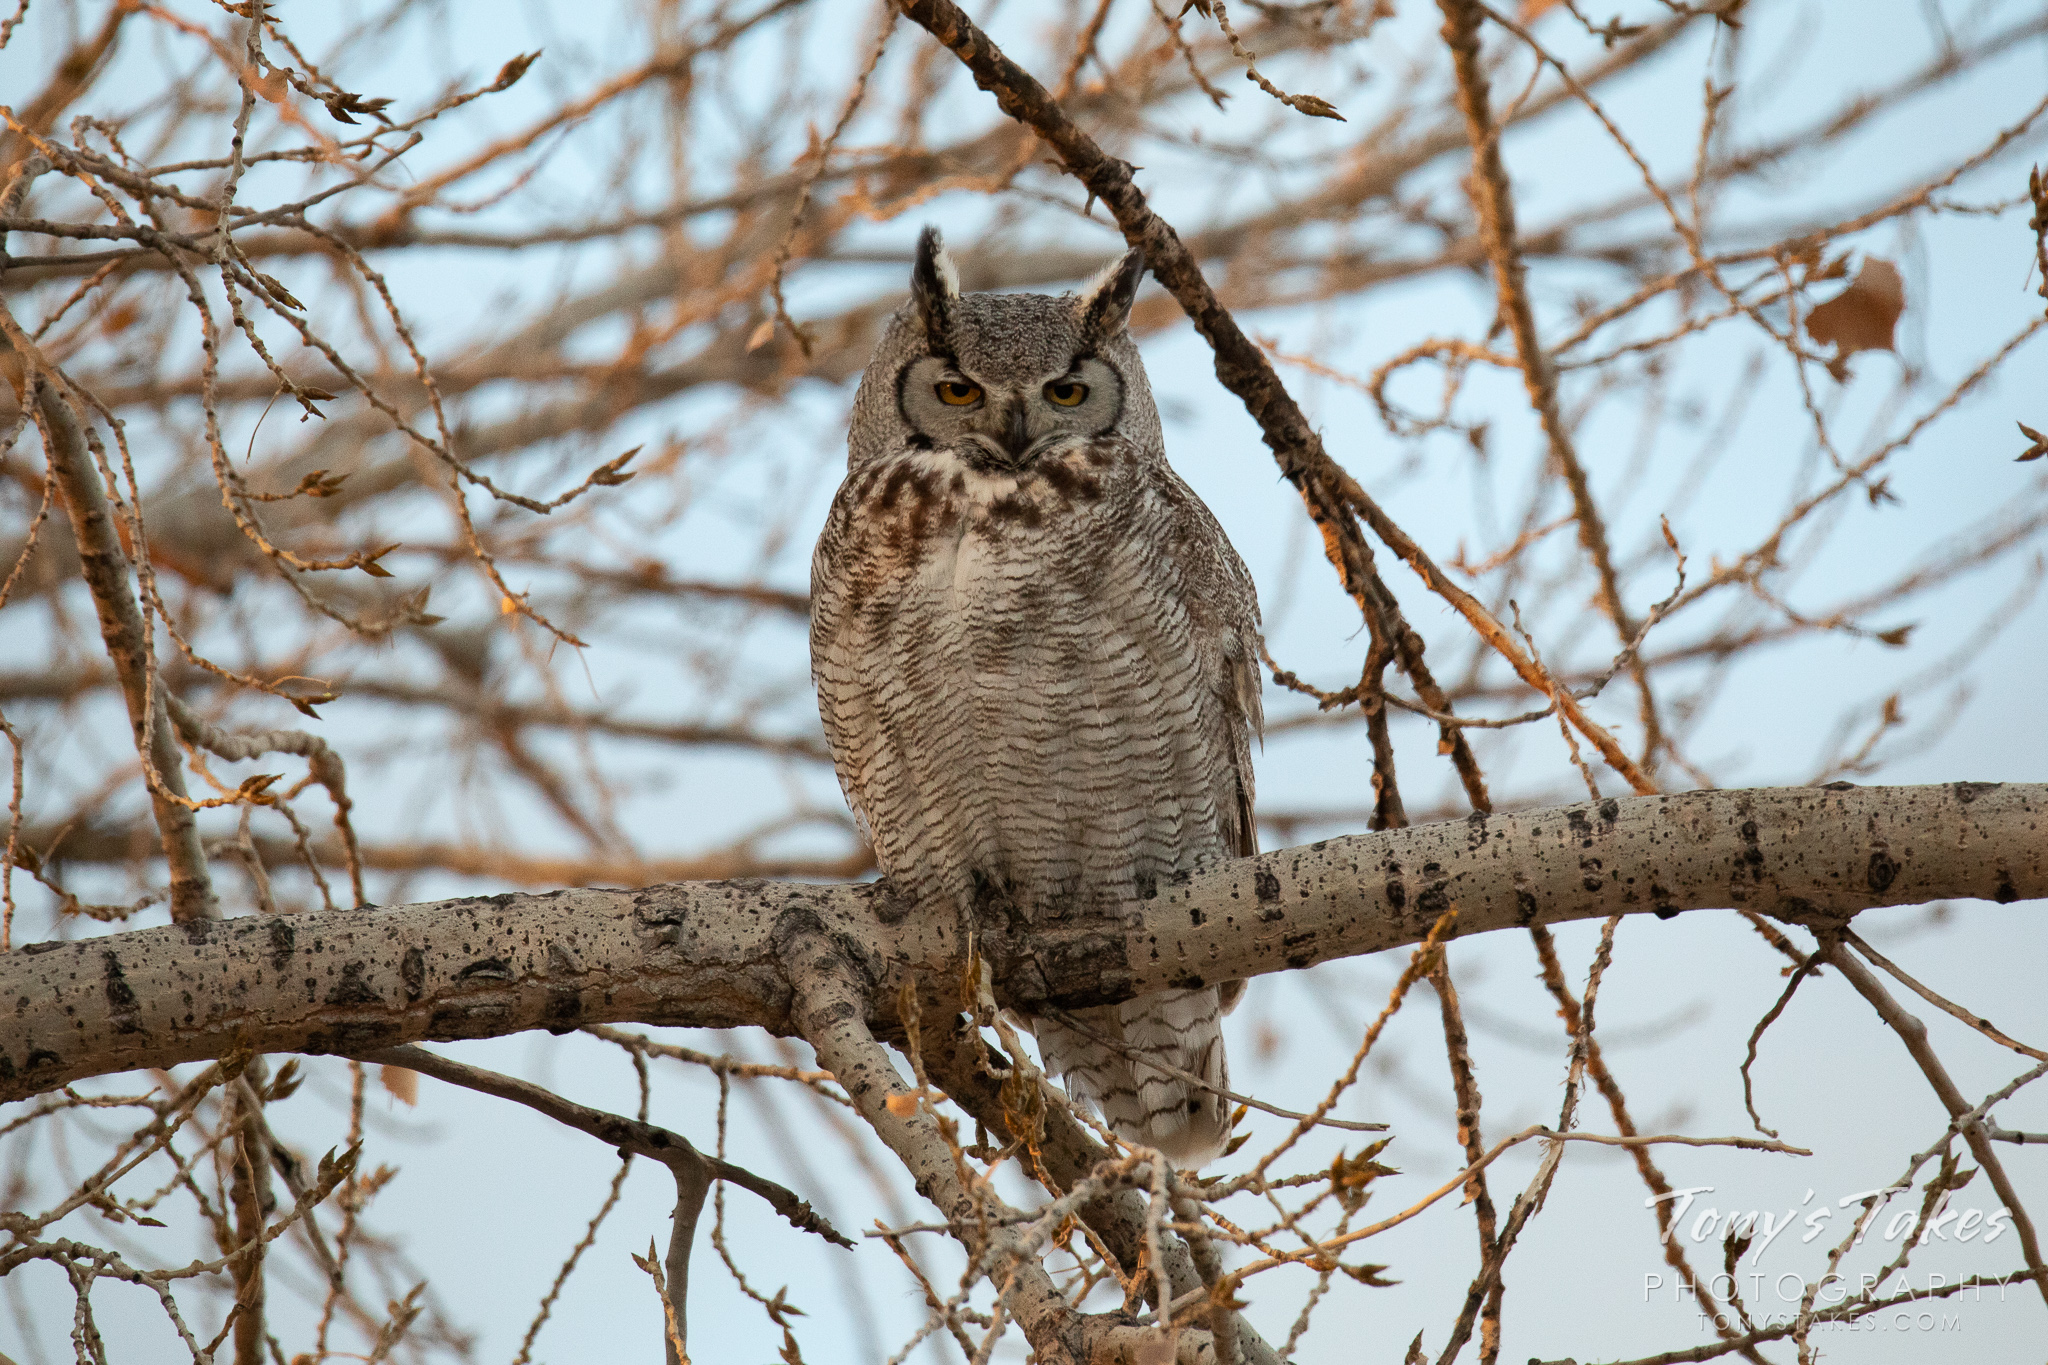 Watchful Great Horned Owl In The Early Morning Light Tony S Takes Photography,Corn Snakes In Ohio